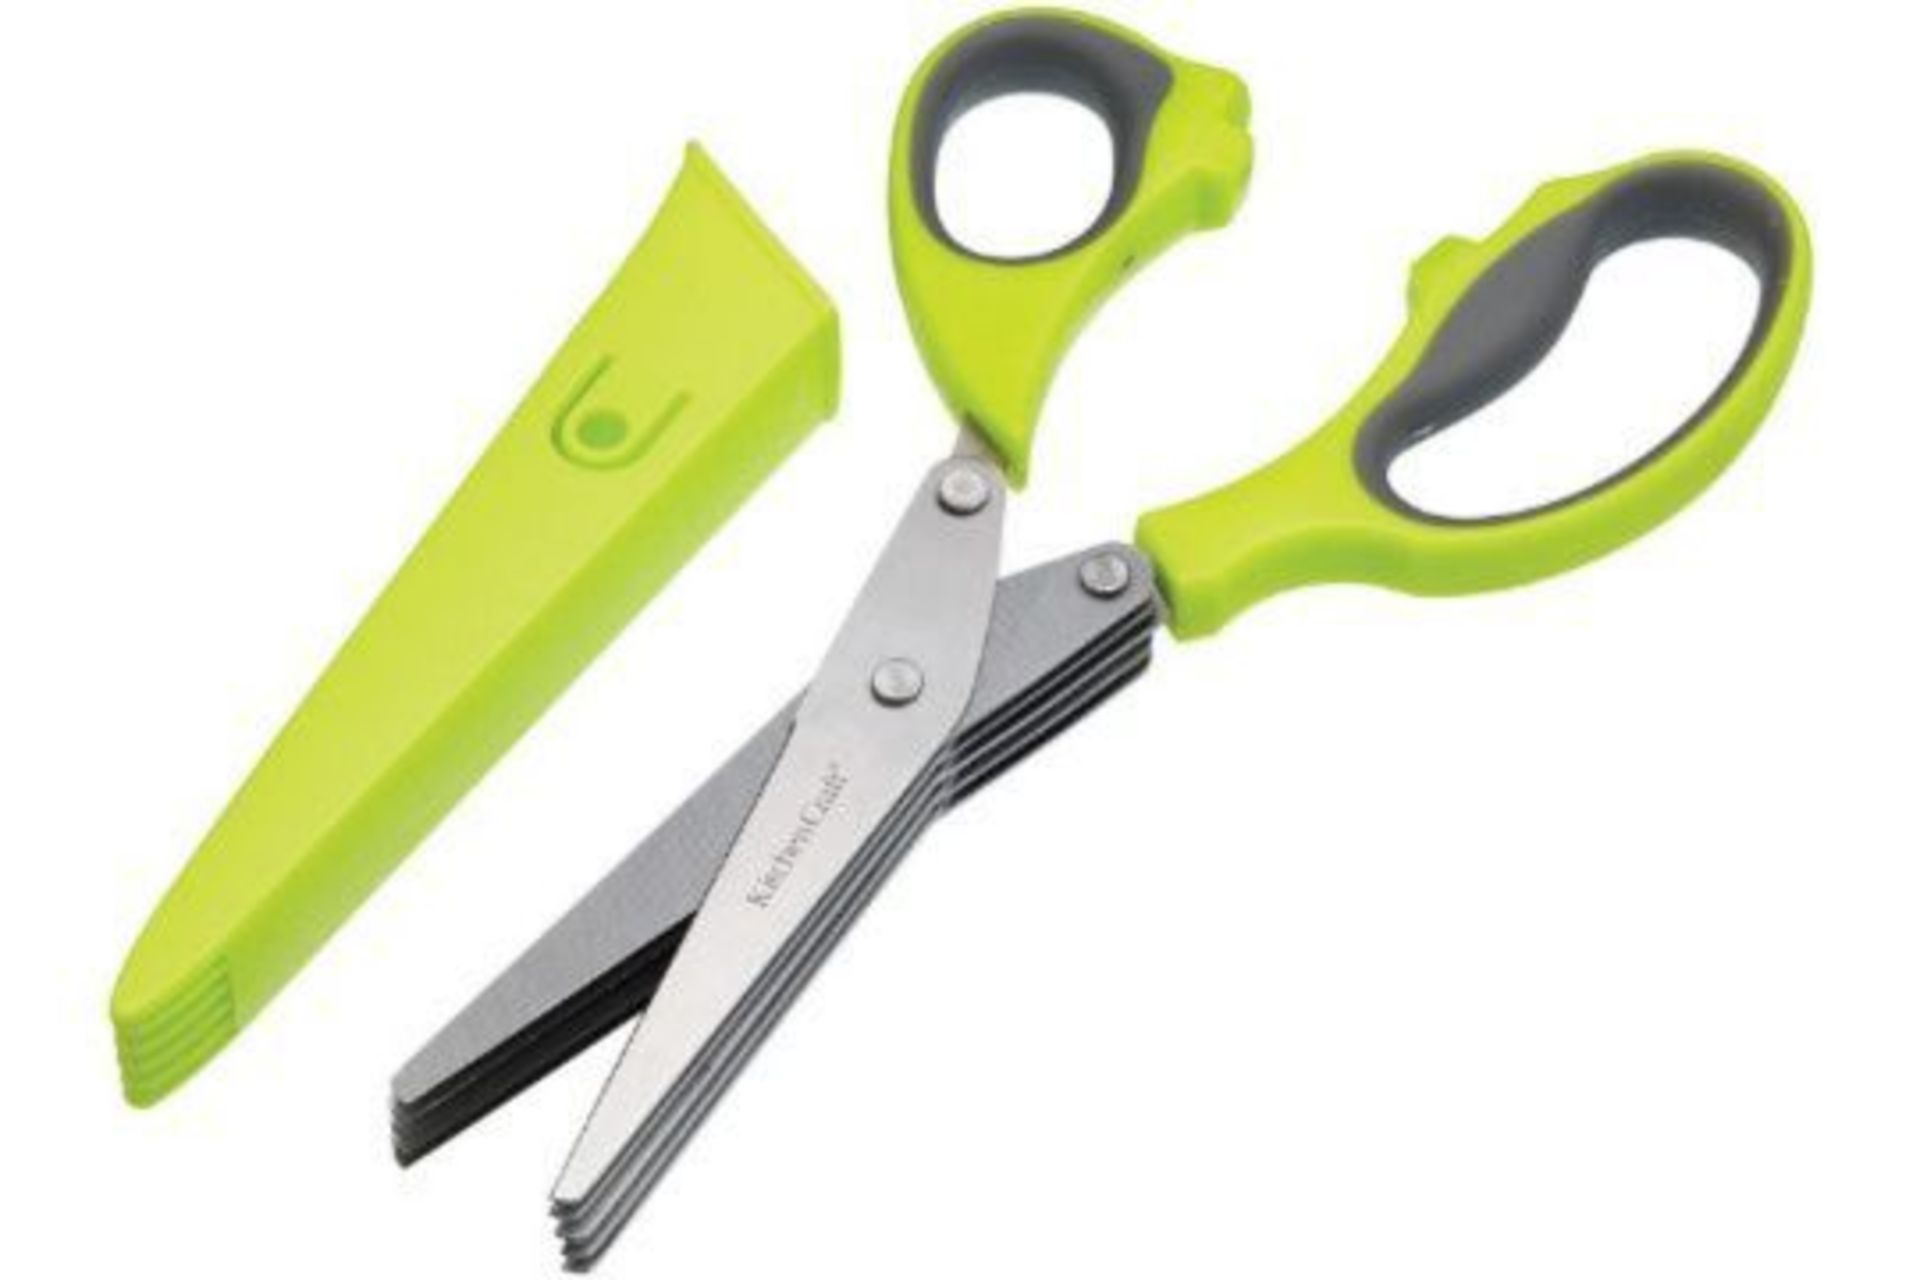 BRAND NEW GARDEN CHEF HERB SCISSORS AND CASE - RRP £7.49